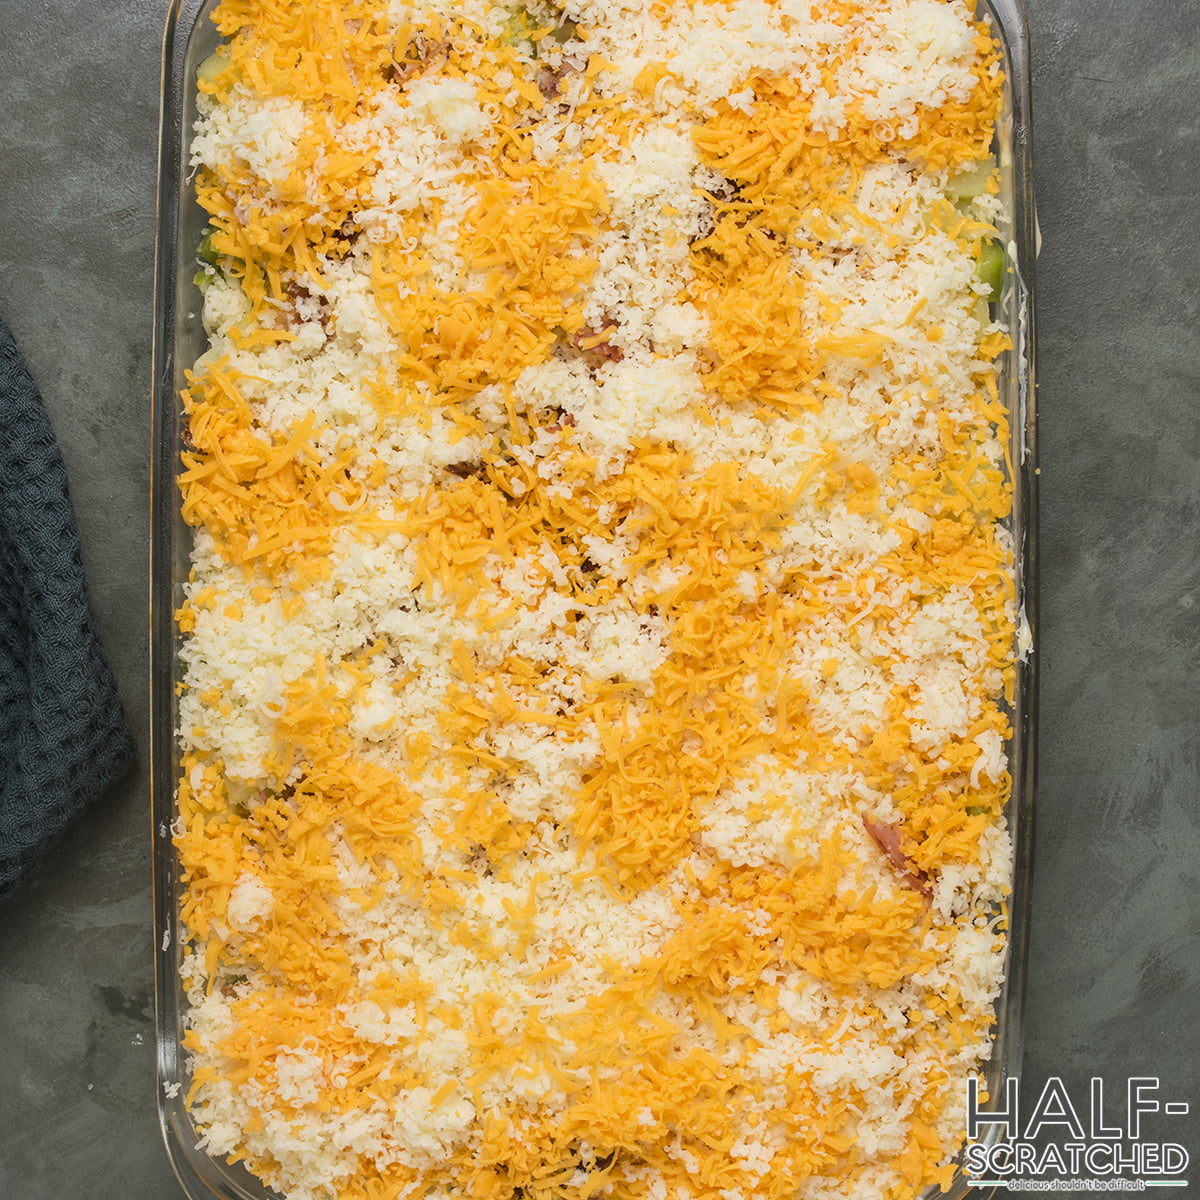 Grated cheese on top of a baking dish